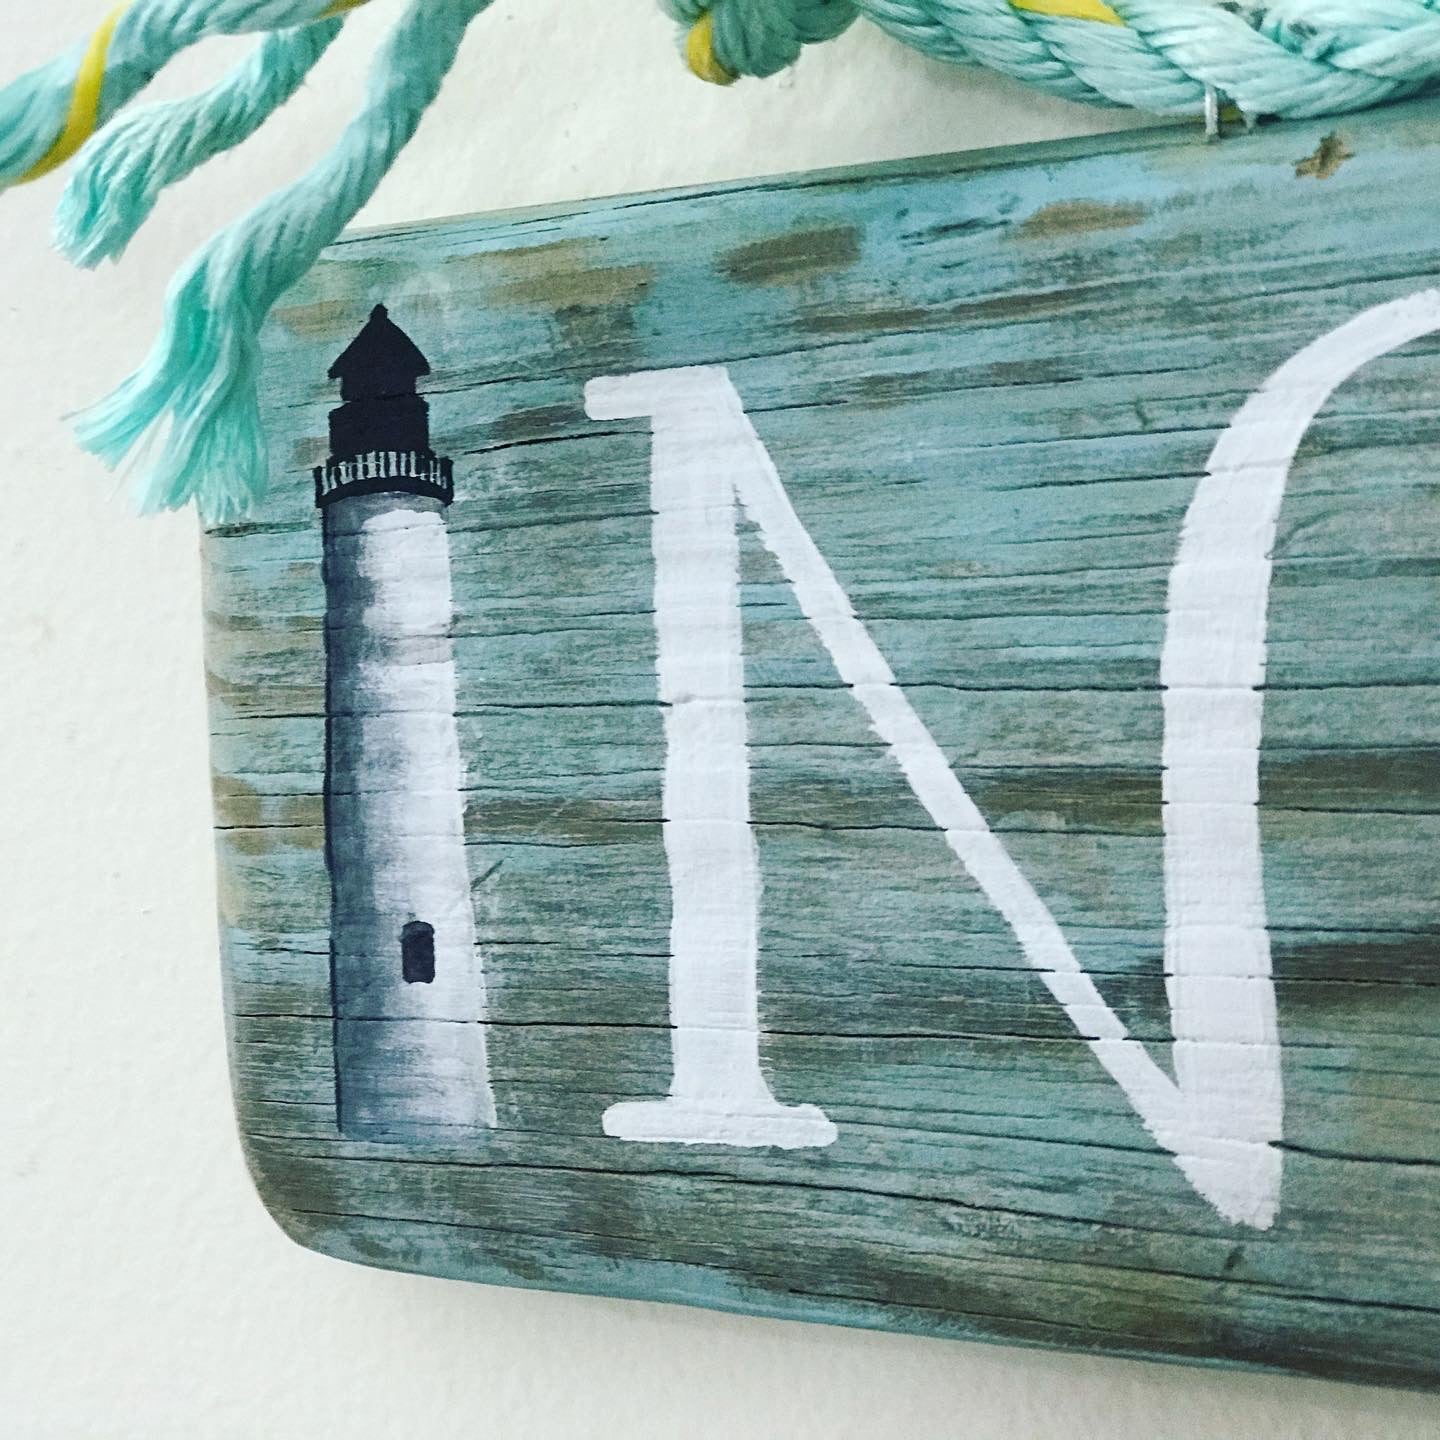 Custom Driftwood Sign with Graphics - Personalized Sign with Fishing Rope Hanger - Hand Painted Wooden Sign - Coastal Decor